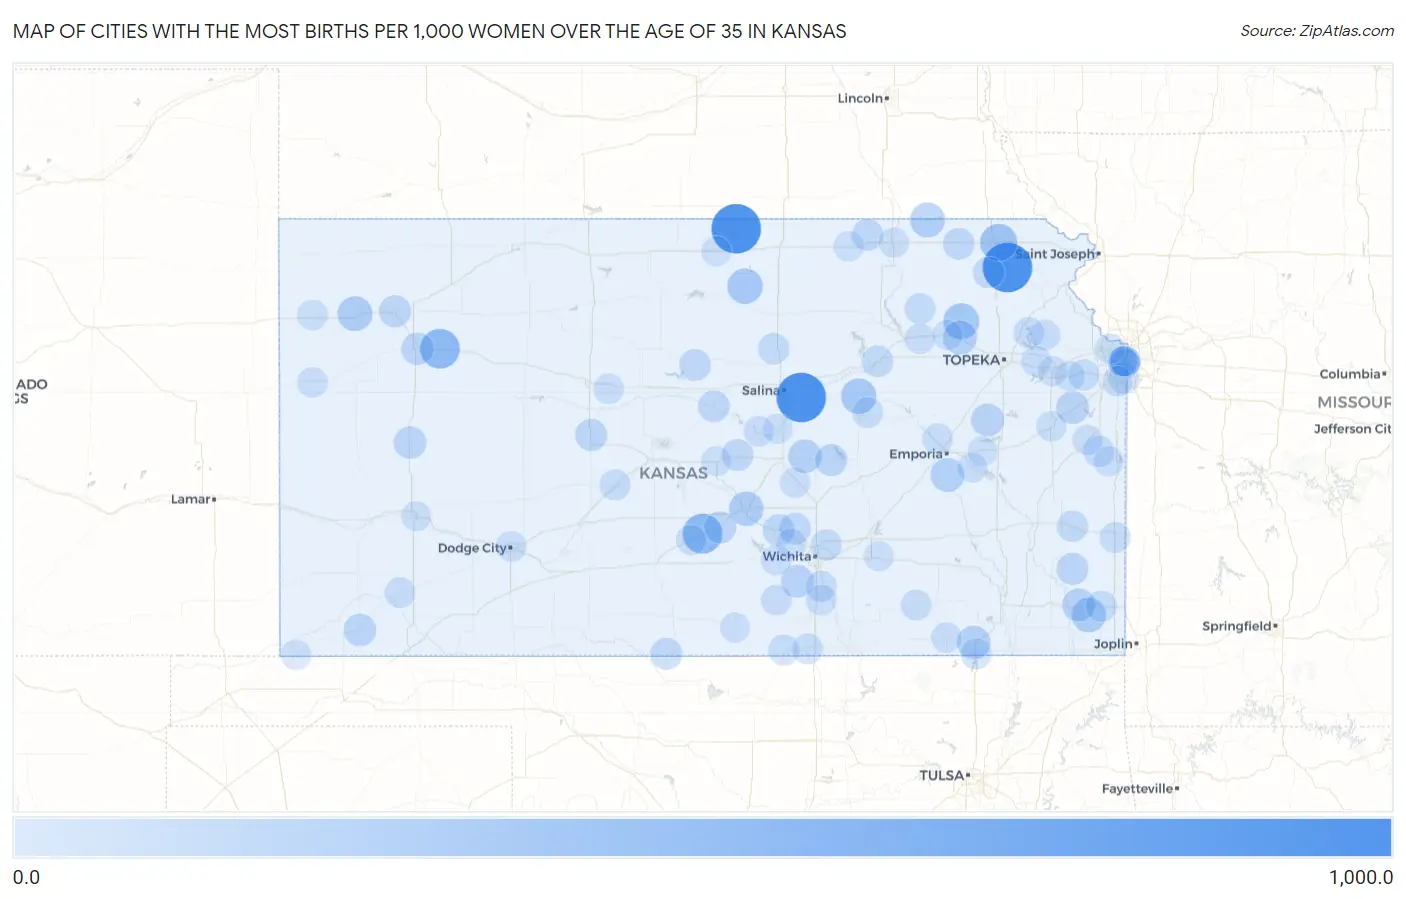 Cities with the Most Births per 1,000 Women Over the Age of 35 in Kansas Map